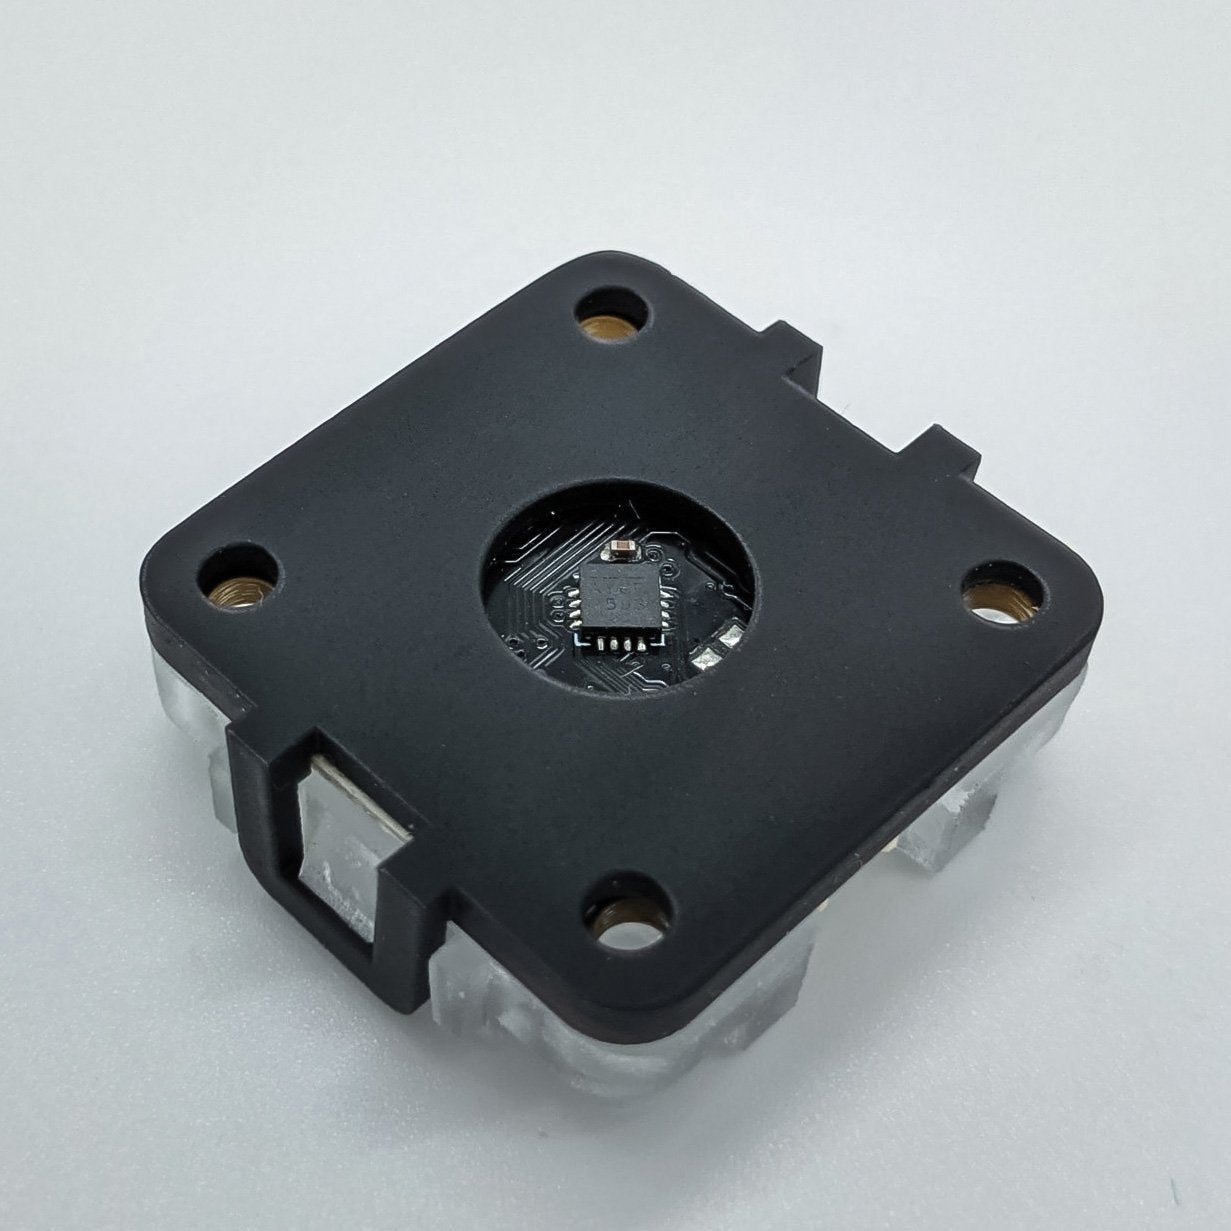 ODrive Encoder OA1 - On-Axis Magnetic Encoder with RS485